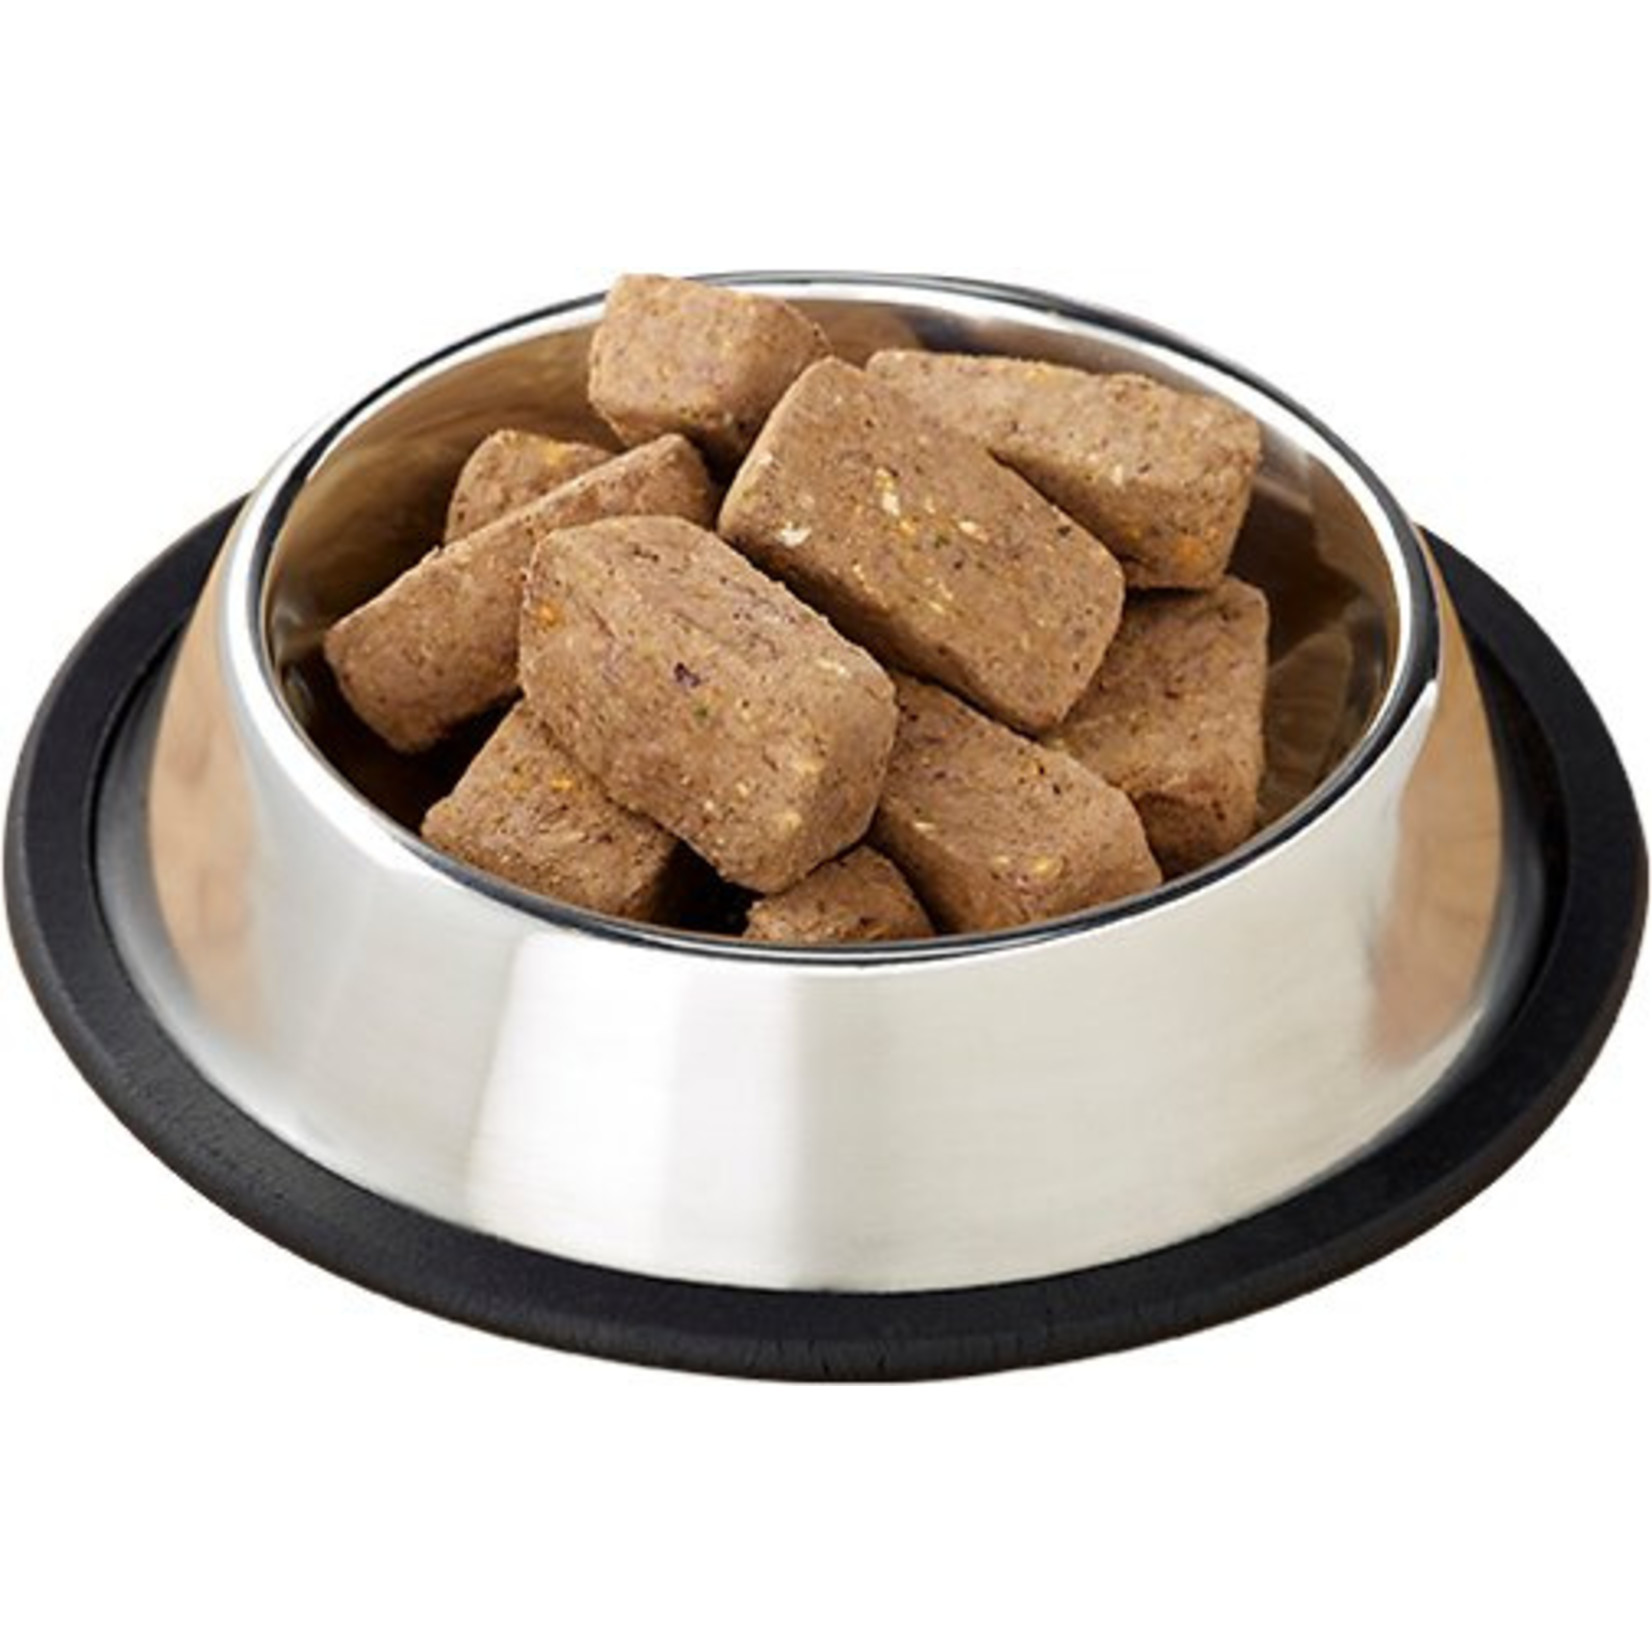 Primal Pet Foods Primal Freeze-Dried Nuggets - Rabbit Formula for Cats